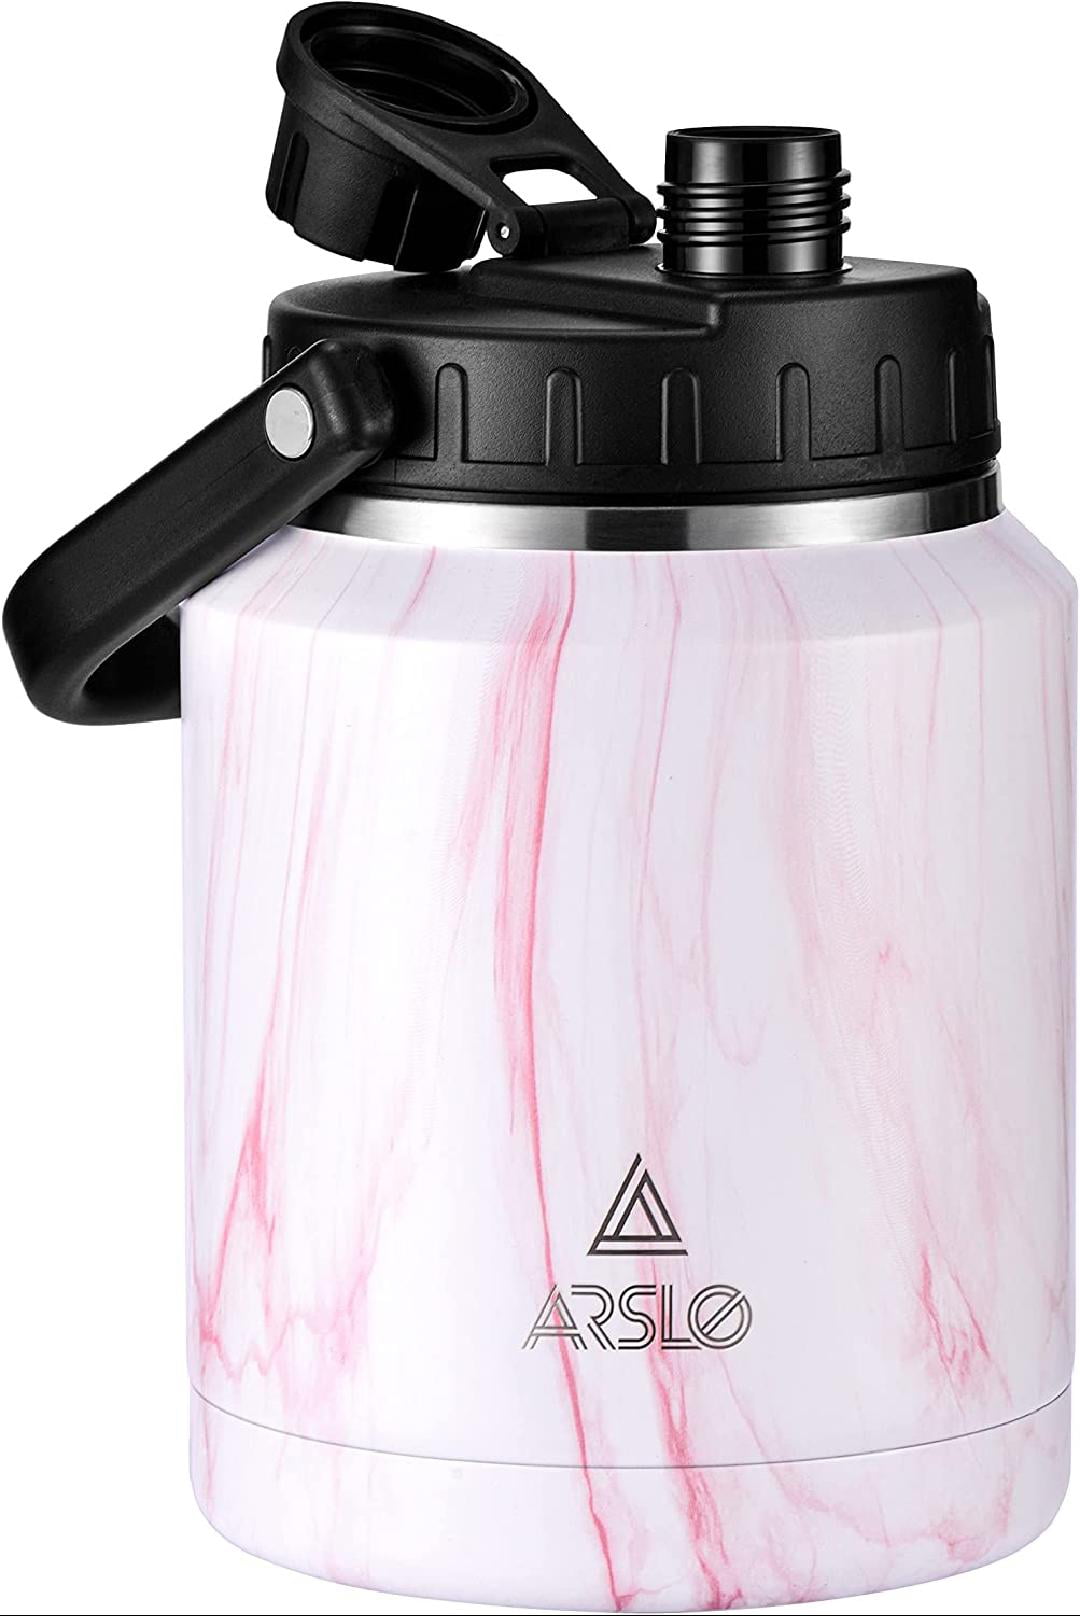  Arslo One Gallon Water Bottle, Large Insulated Water Jug With  Handle, One Gallon Stainless Steel Water Bottle,Black, 128 oz : Home &  Kitchen